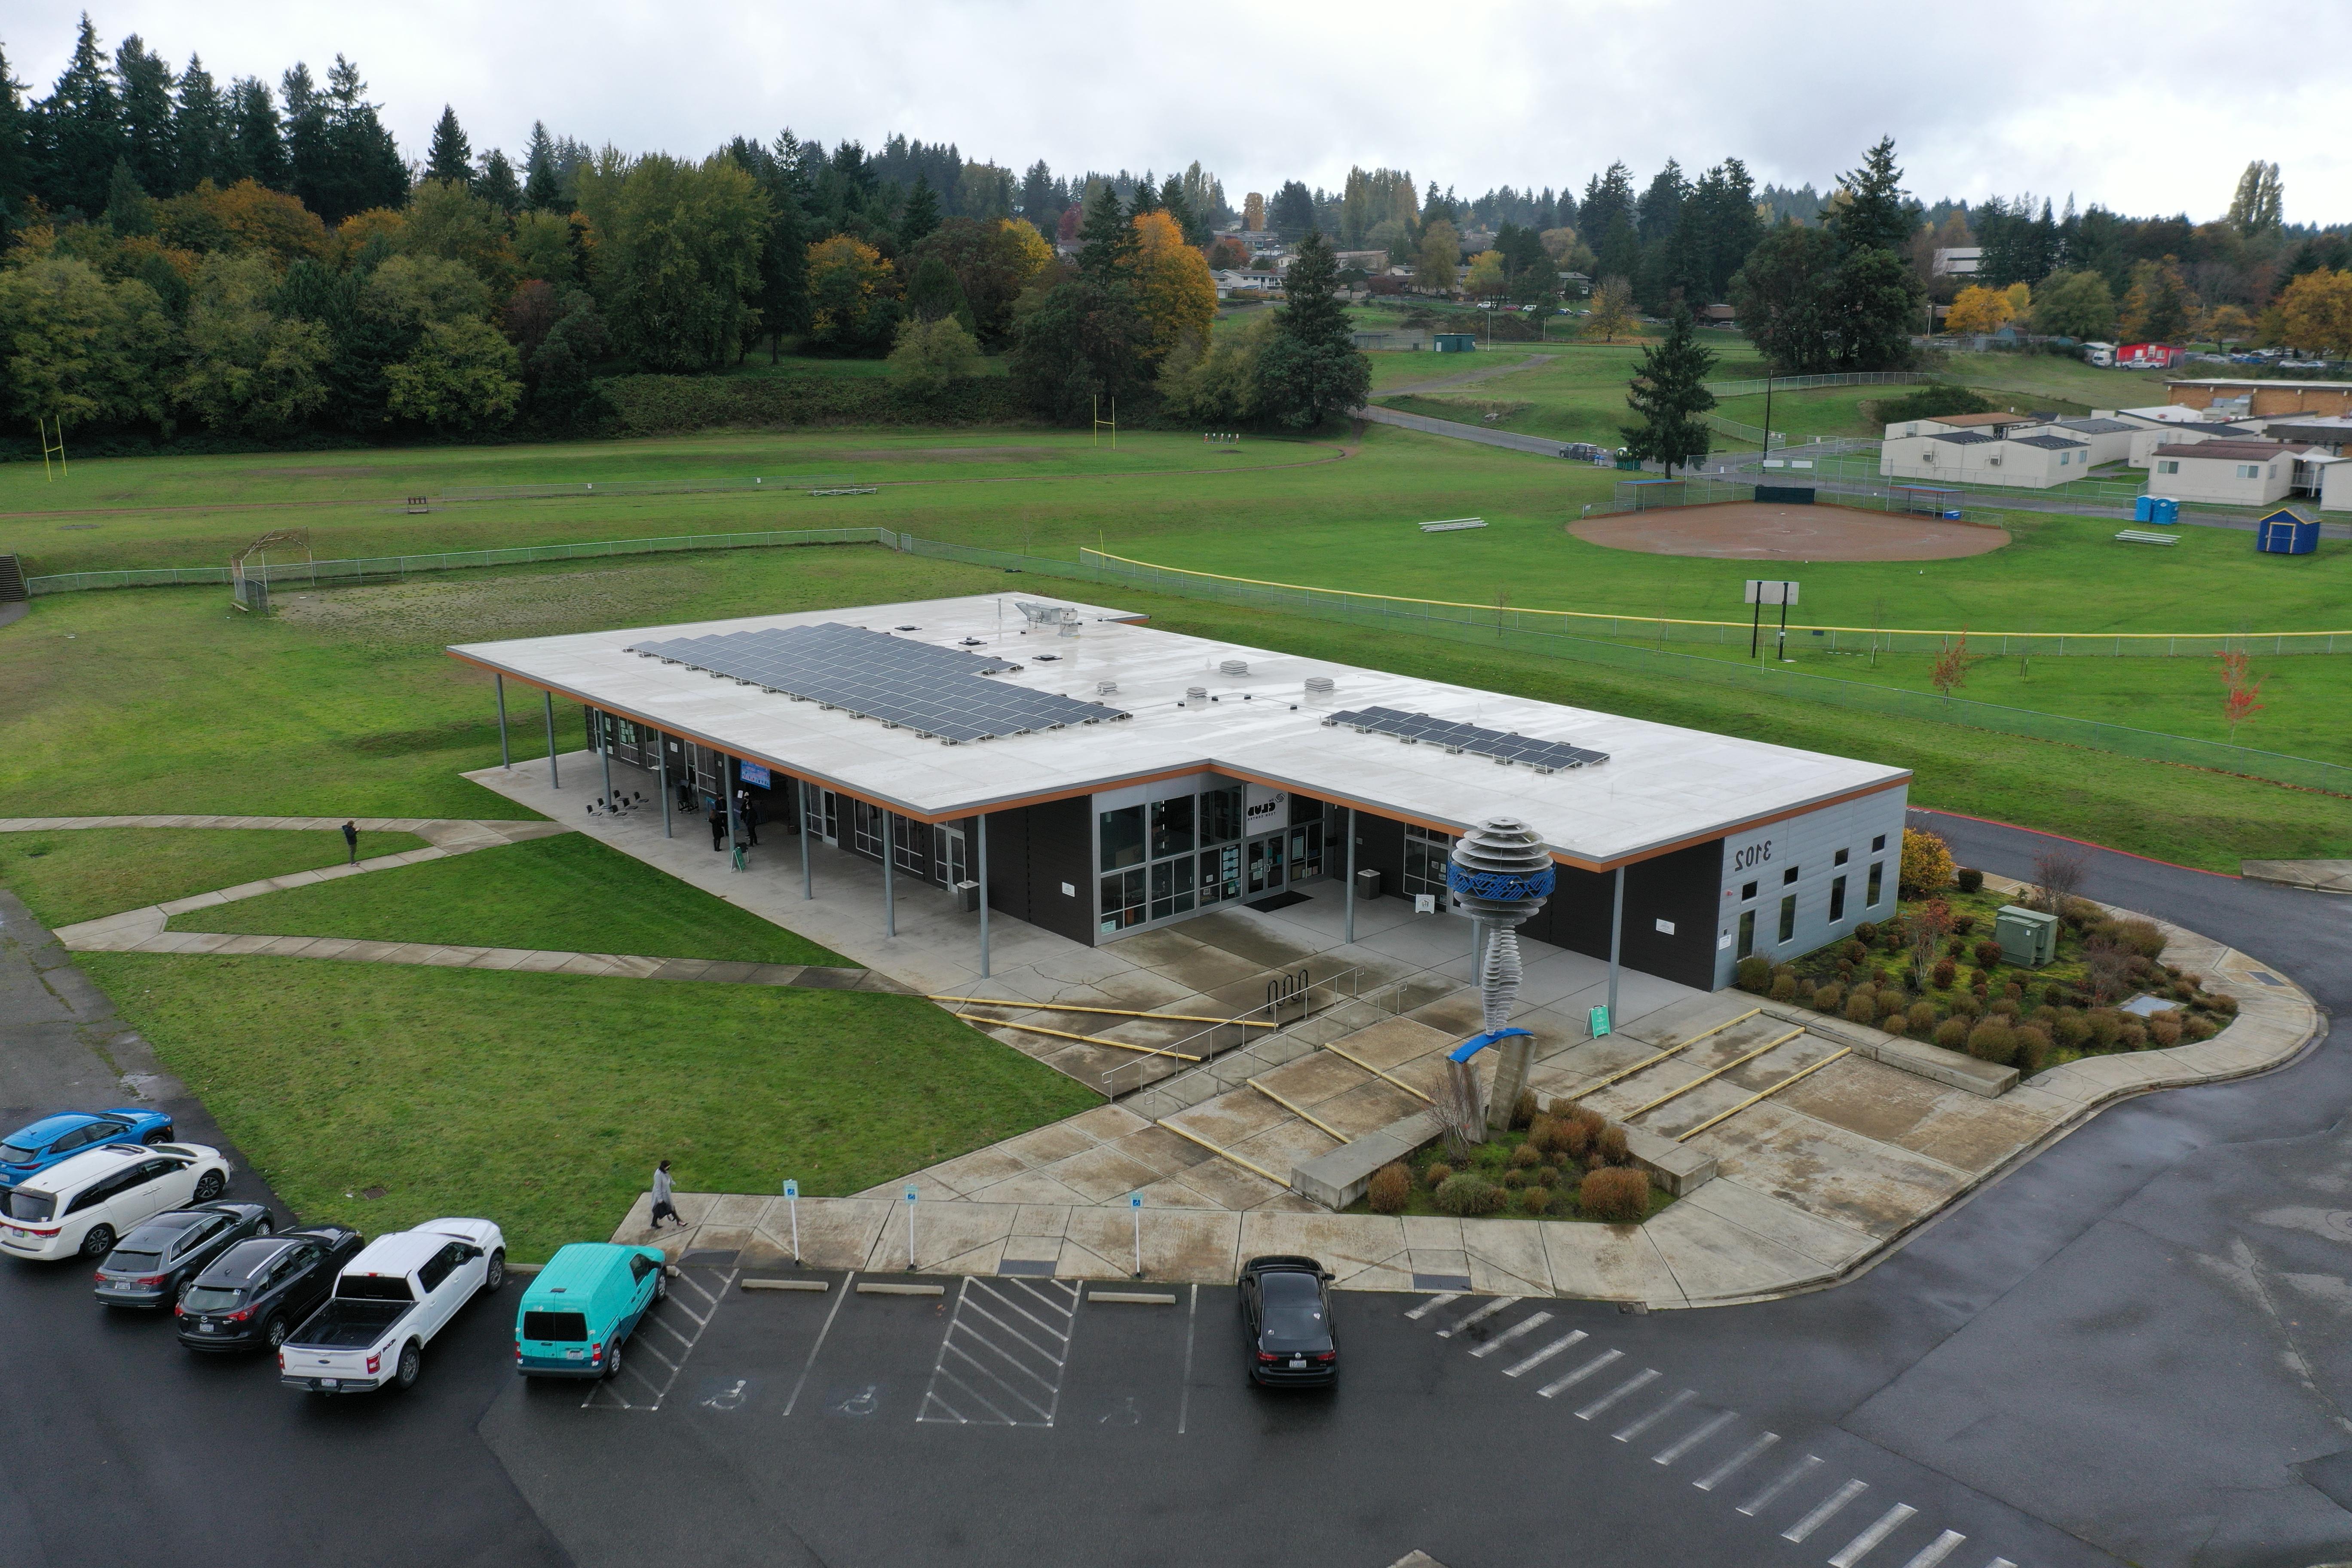 Boys and Girls Club campus with rooftop solar panel array